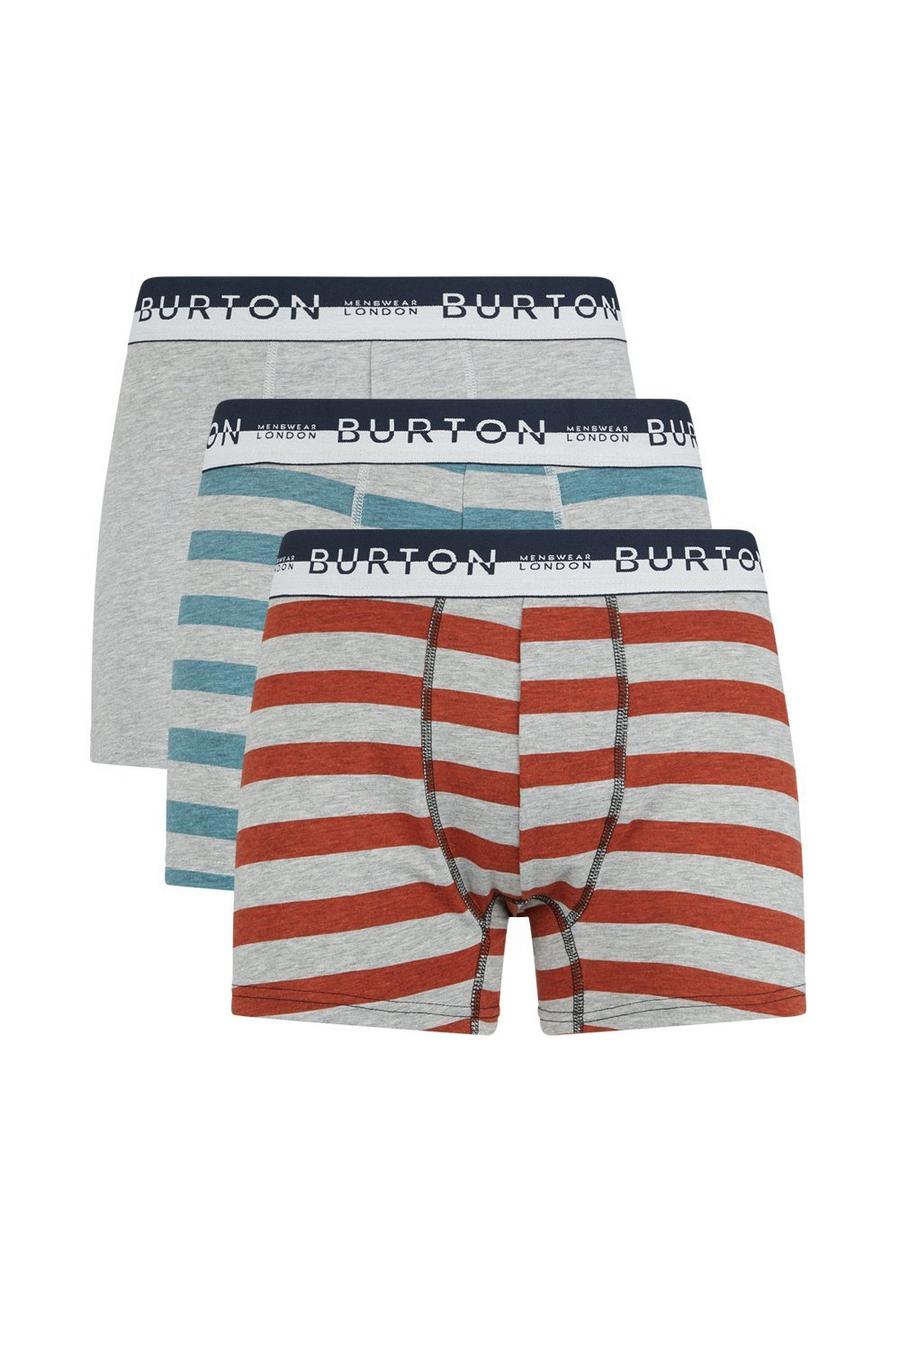 3 Pack Marl Stripe Teal and Red Trunks